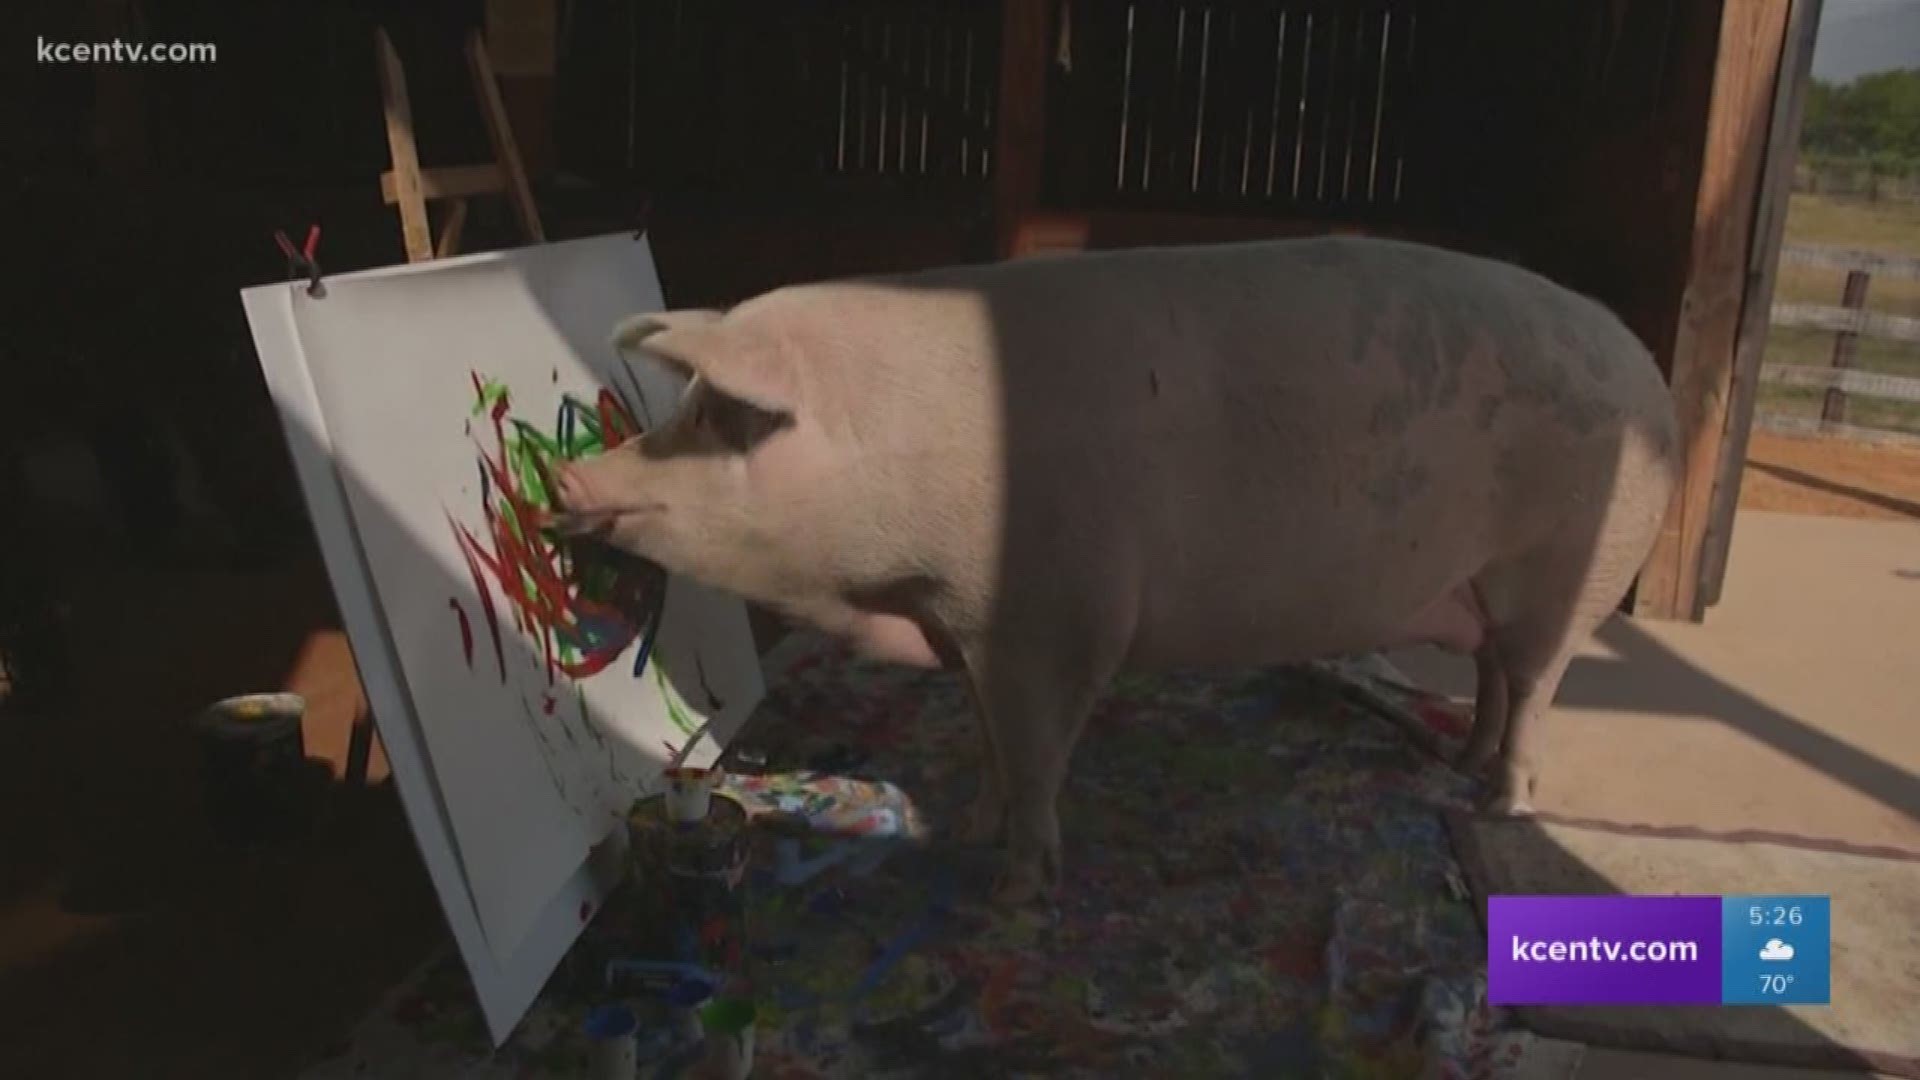 A rescued pig in South Africa named "Pigcasso" has become an art sensation.